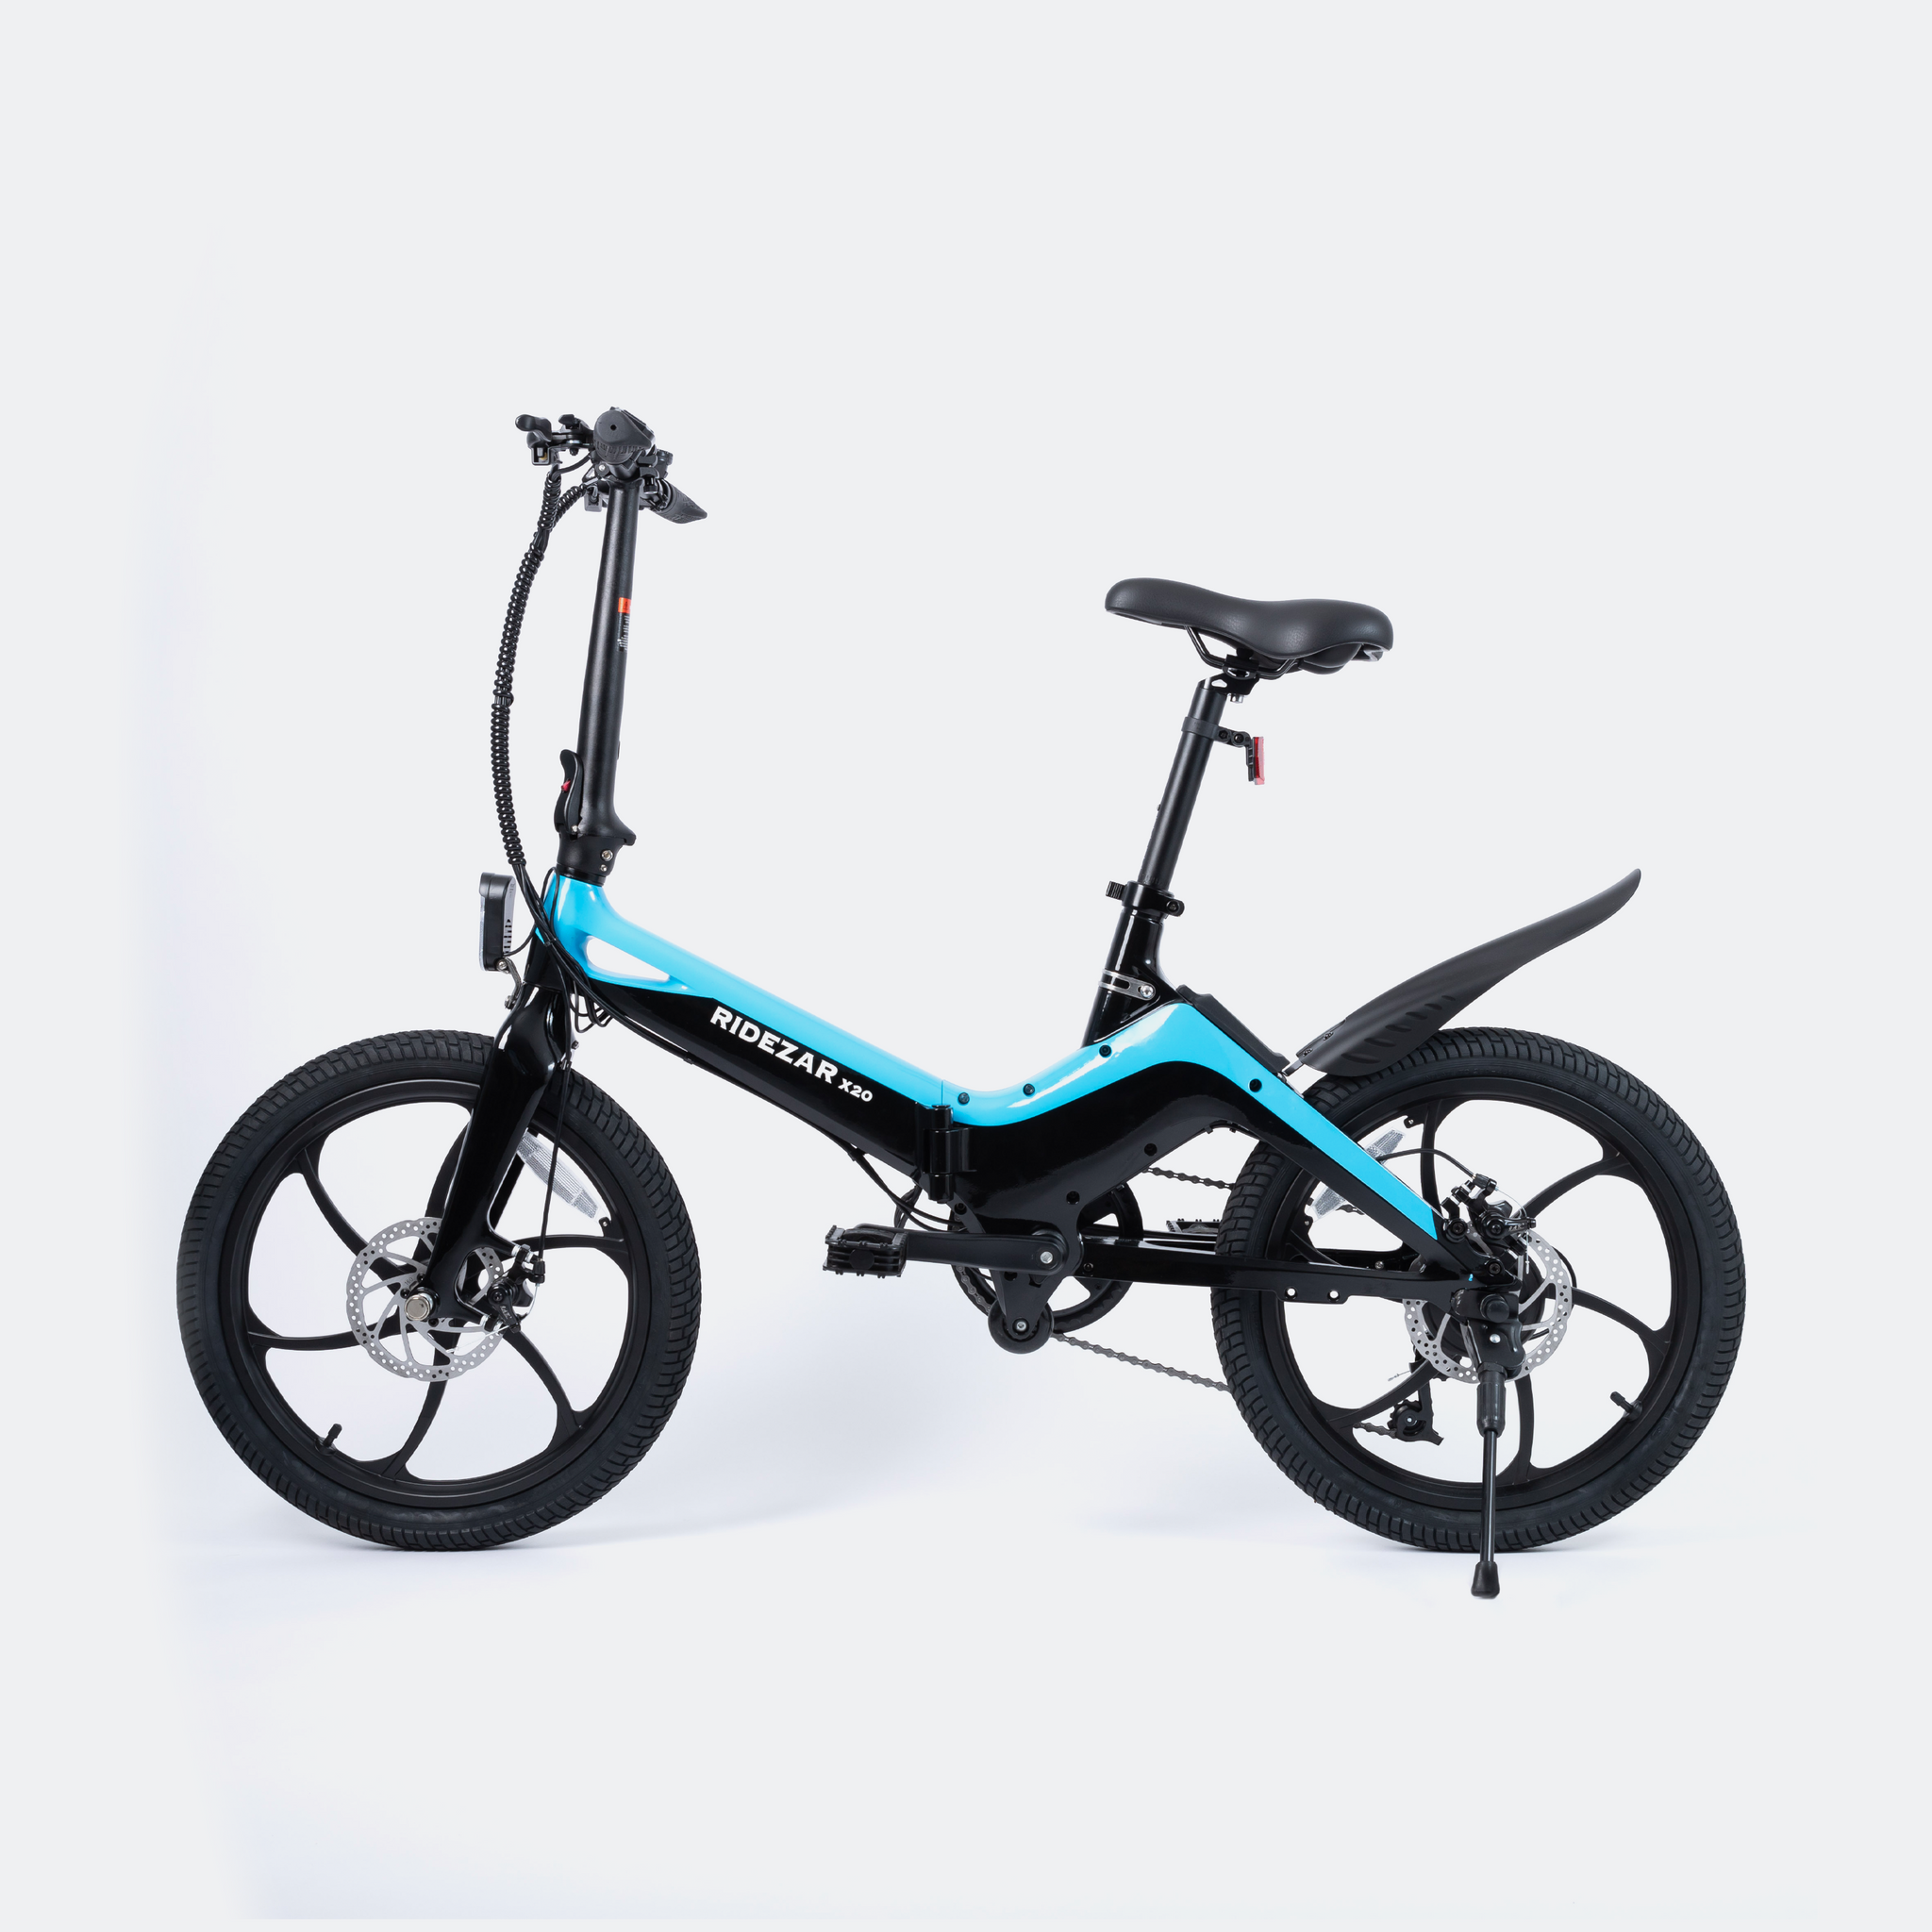 Side view of the 2022 Ridezar Rapid X20 Foldable Electric Bike 